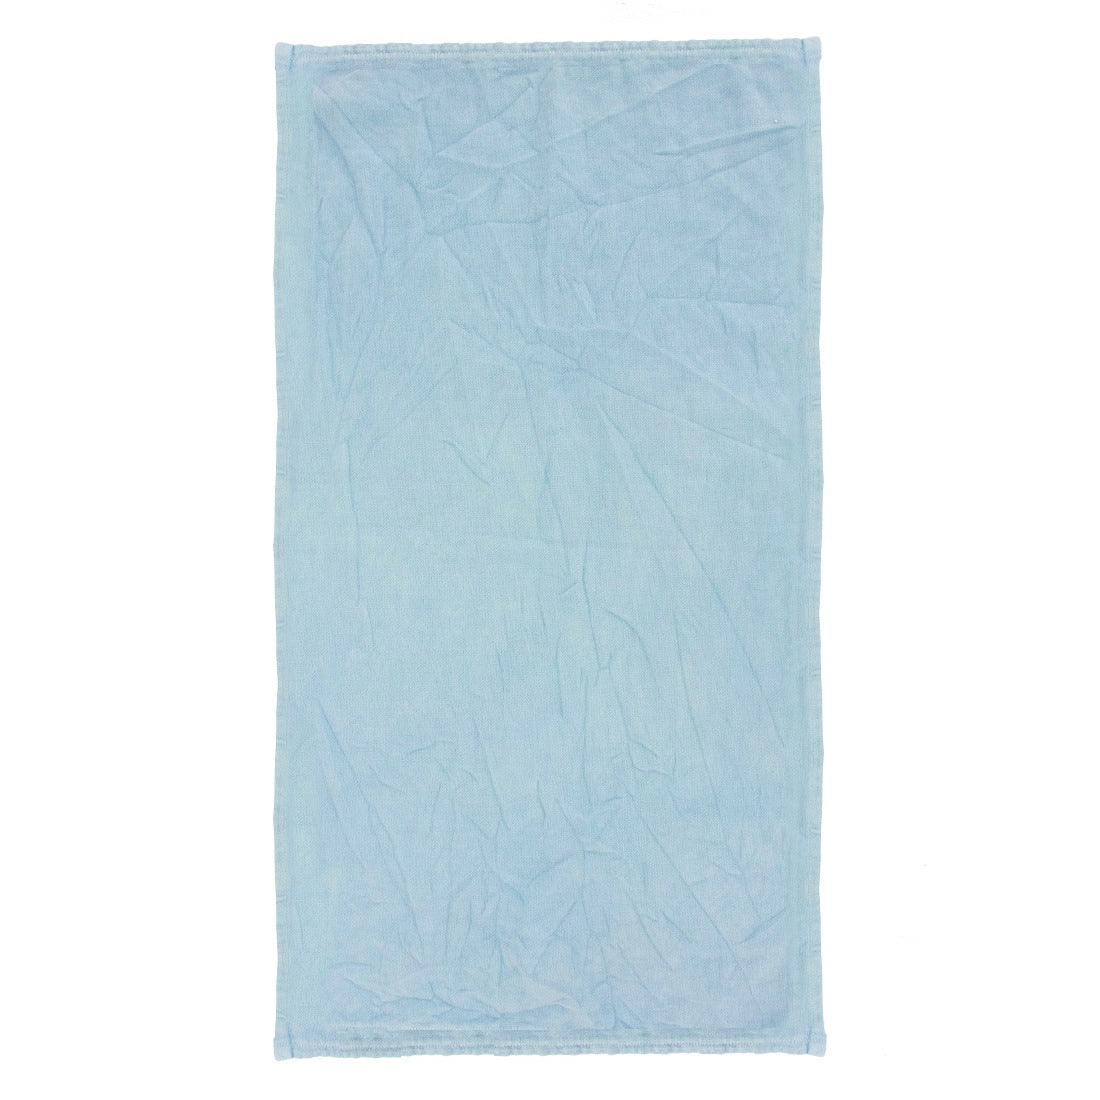 XERO Ultra Premium Recycled Surgical Towel, Cleaning Supplies